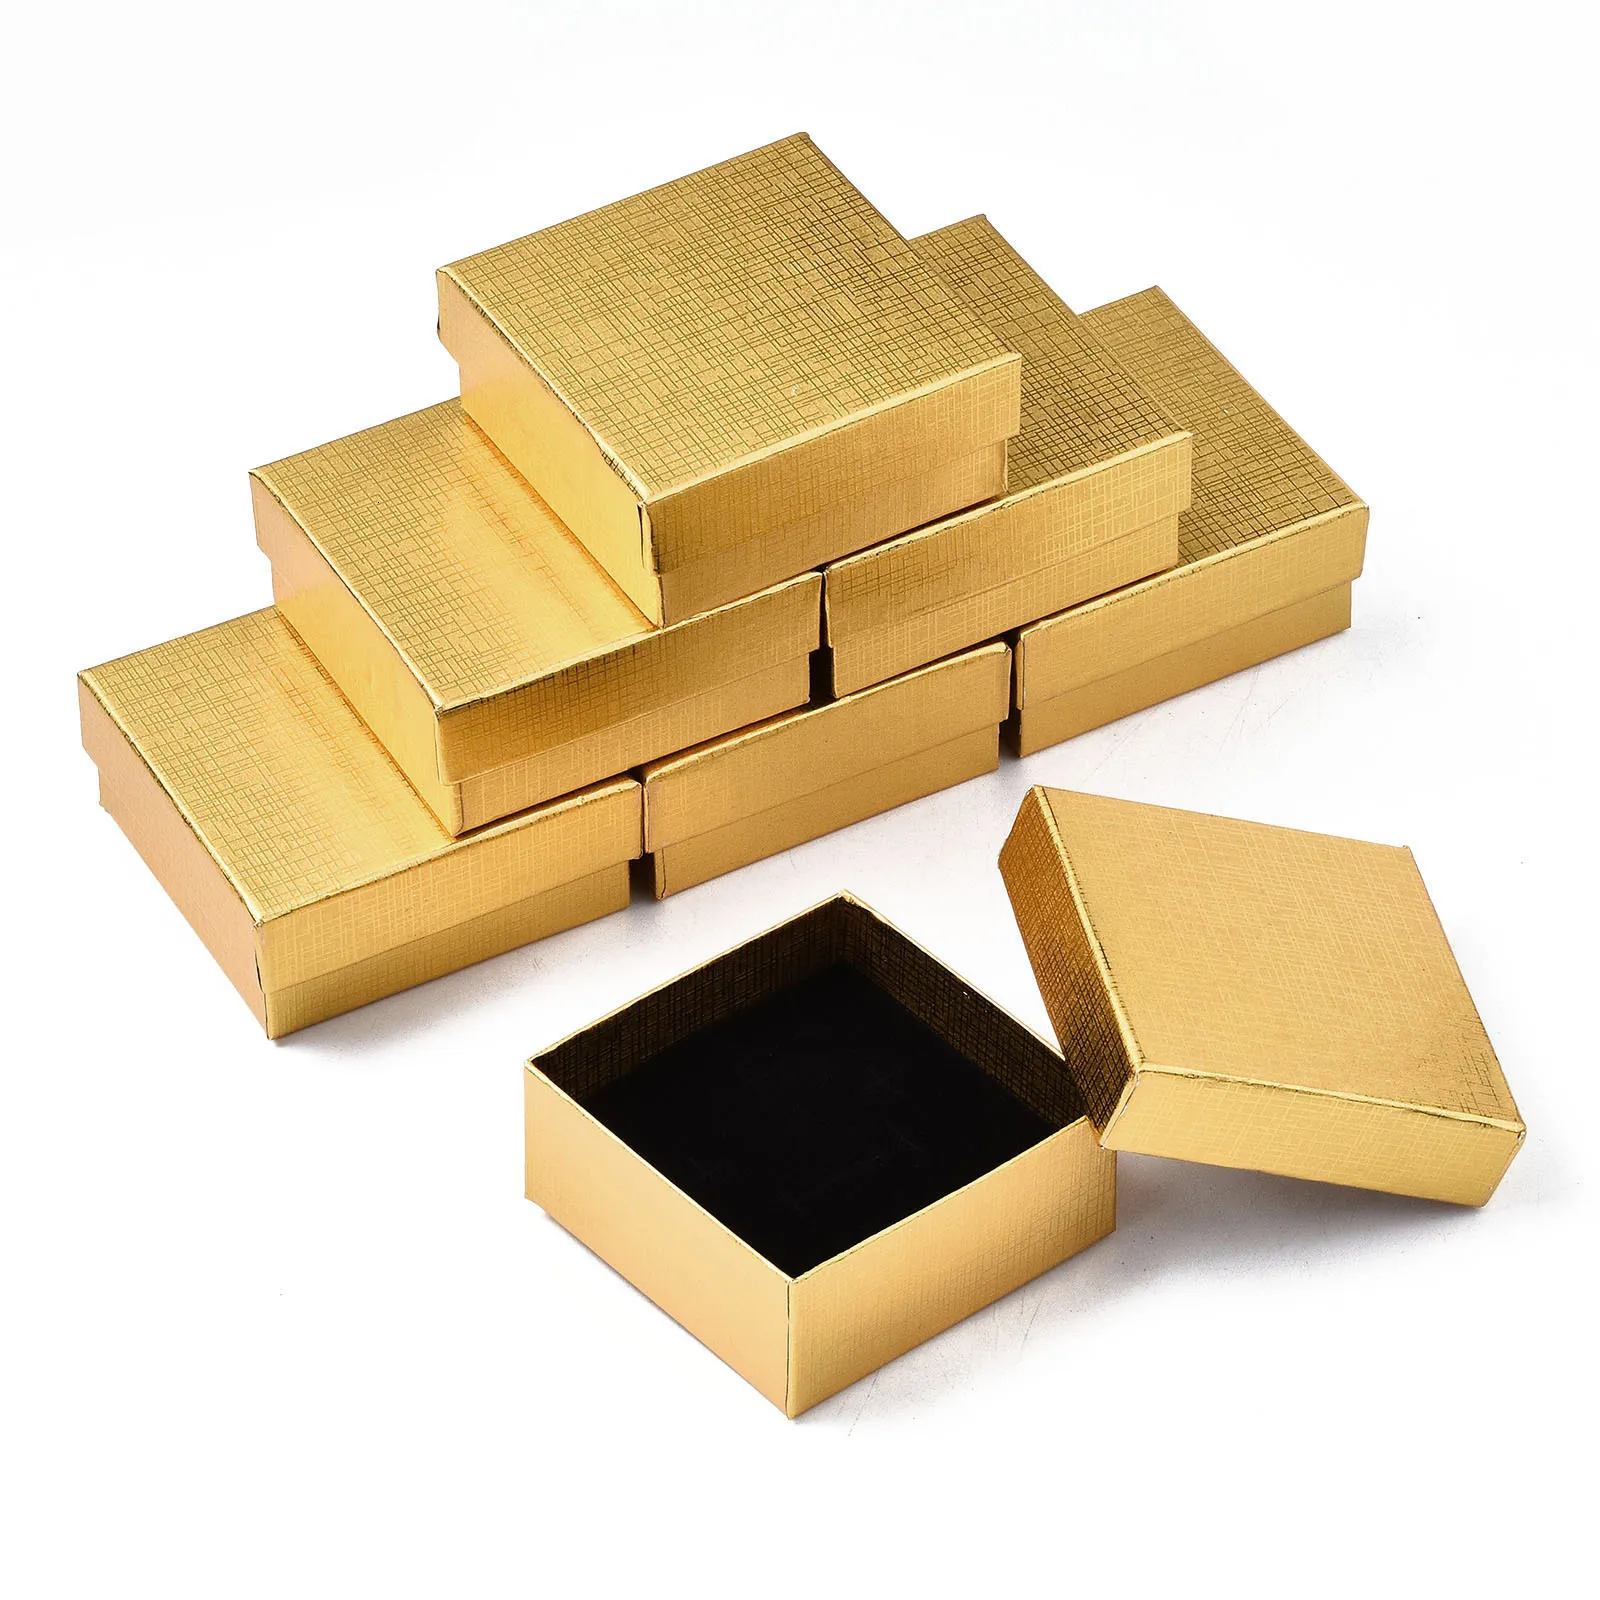 Jewelry Boxes 12Pcs Cardboard Jewelry Boxes Ring Earring Necklace Gift Box Jewelry Display Packaging Organizer Storage Container 7.4x7.4x3.2cm 230718